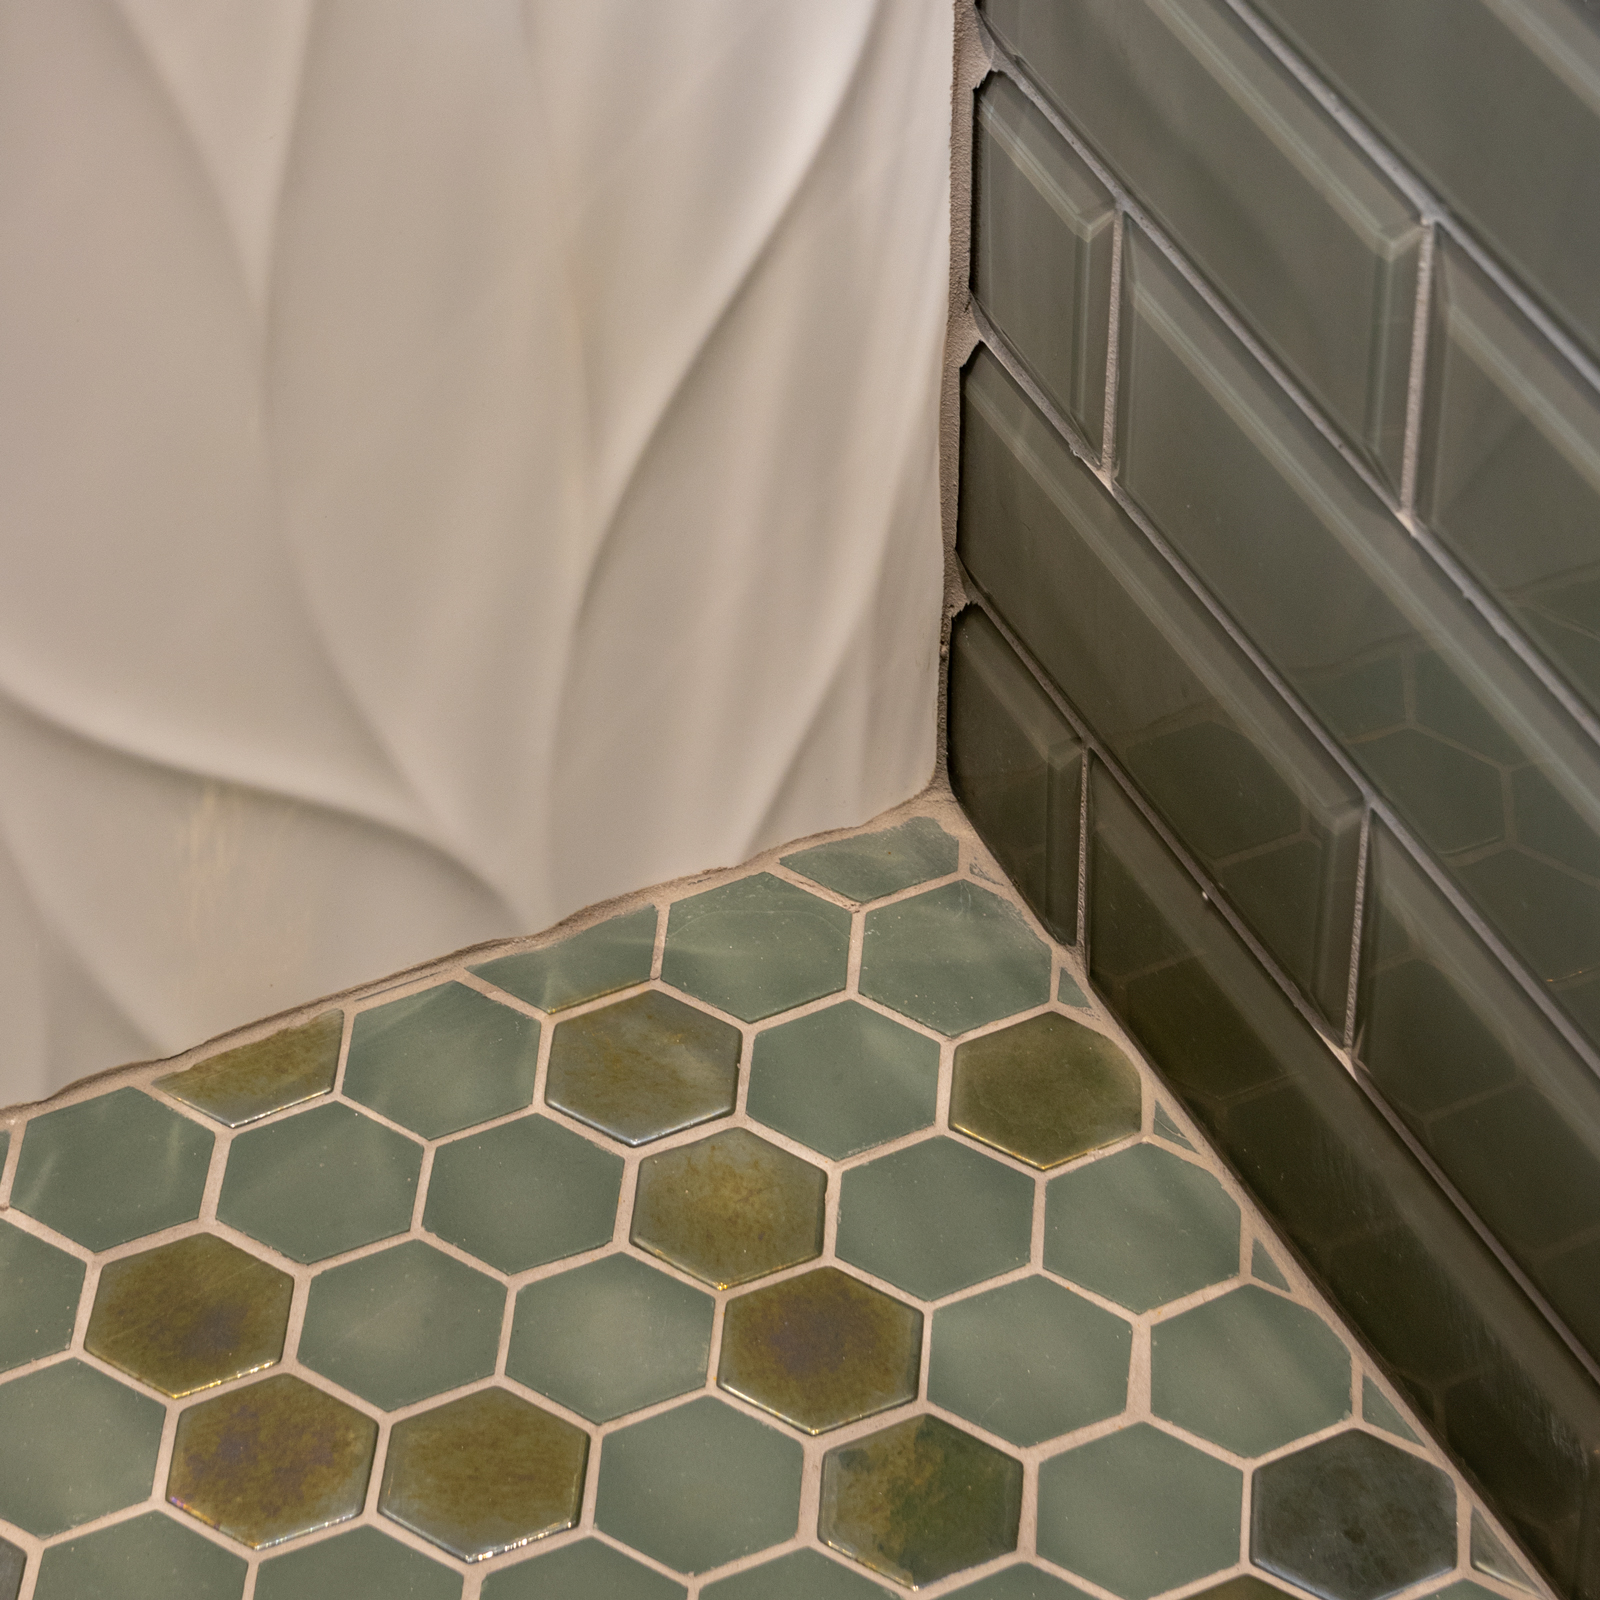 The first guest room shower has three tertiary tiles that all complement each other as parts of a monochromatic green color scheme.   